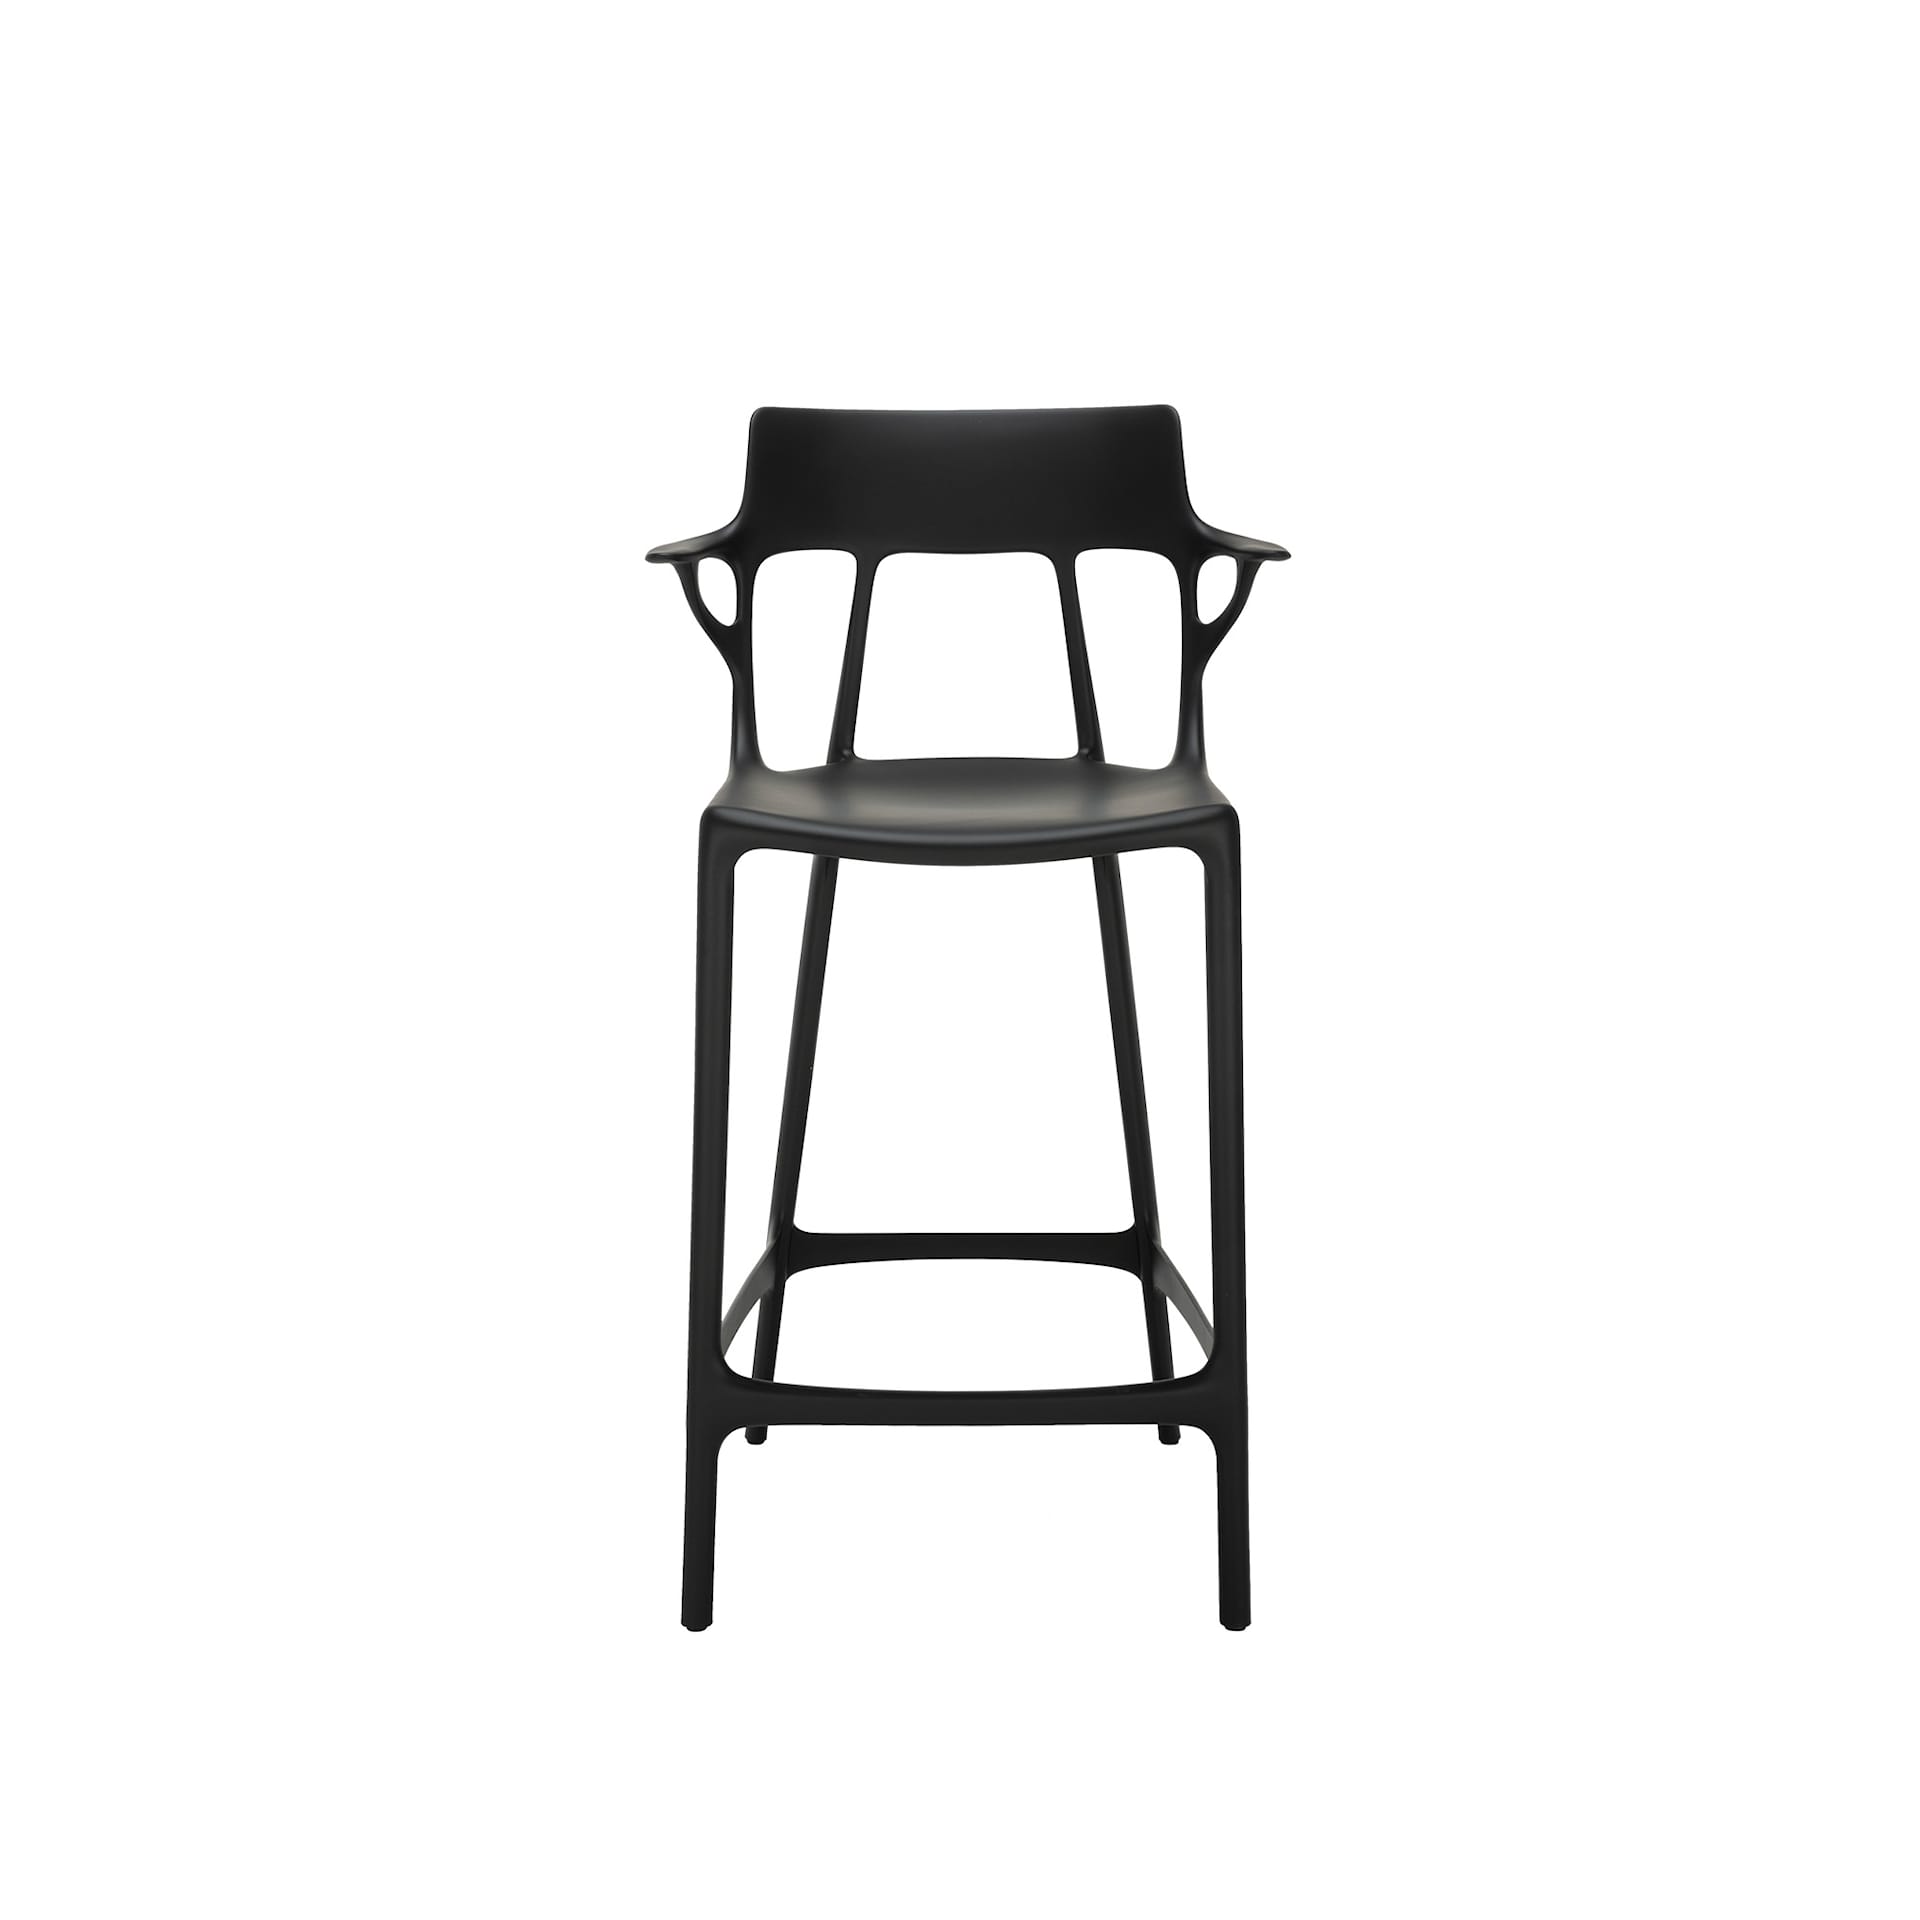 A.I. Stool Recycled - Kartell - Philippe Starck - NO GA